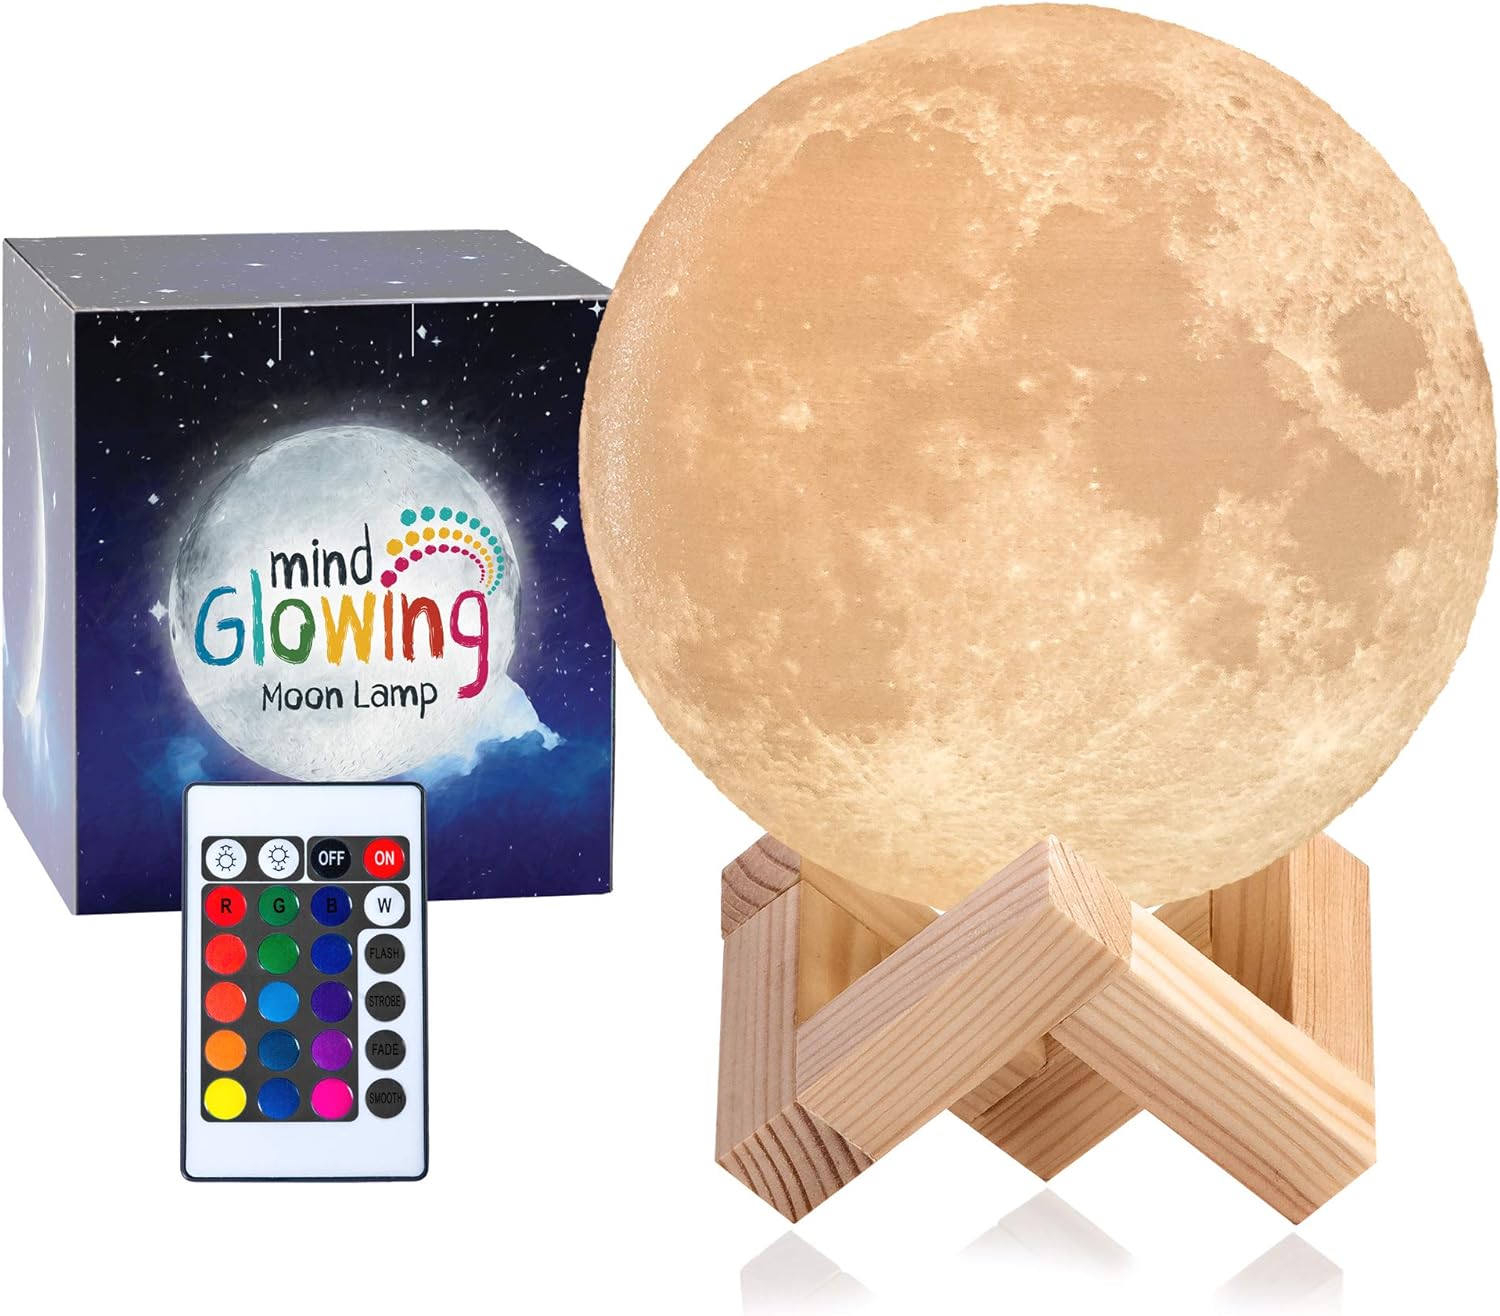 Lunar Night Lamp Decor Birthday Gifts for Lover Kids Friend Party Bedroom Moon Lamp 3D Printed Dimmable Timer Moonlight 4.7 Inch 16 Colors with Stand & Remote & Touch Control & USB Rechargeable